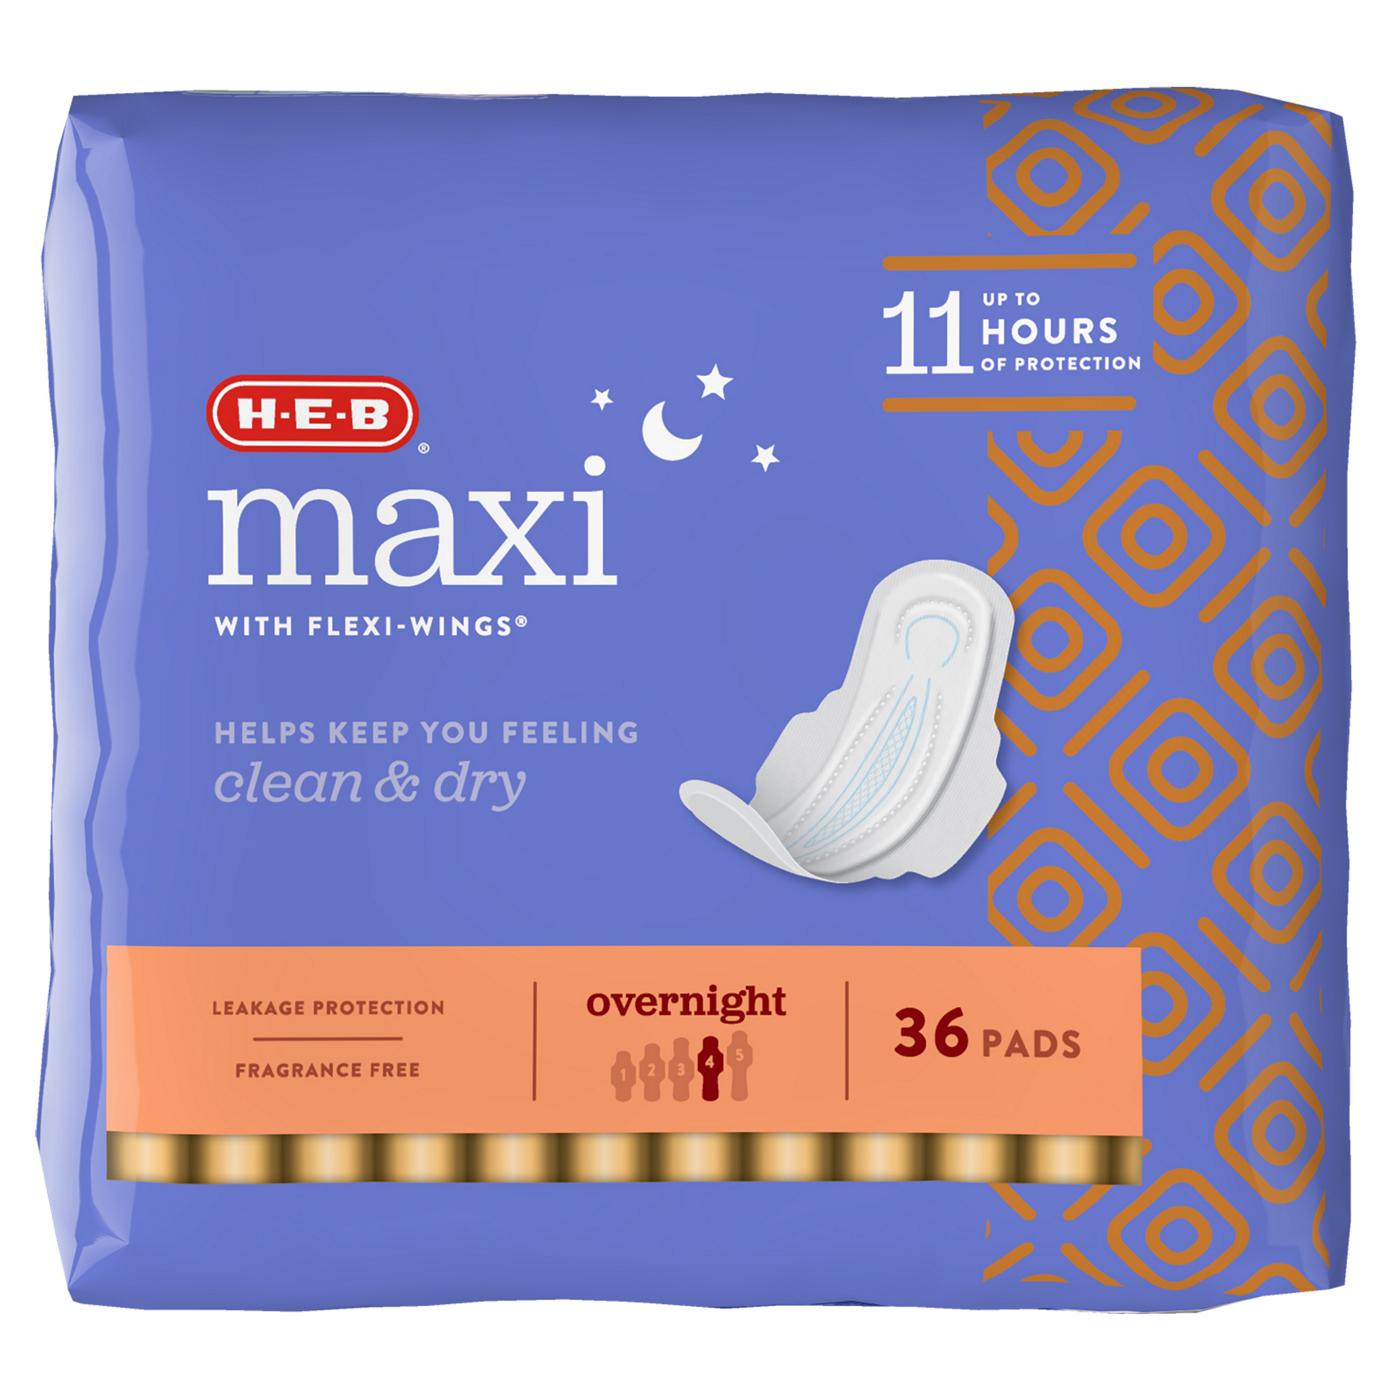 H-E-B Maxi with Flexi-Wings Overnight Pads; image 6 of 7